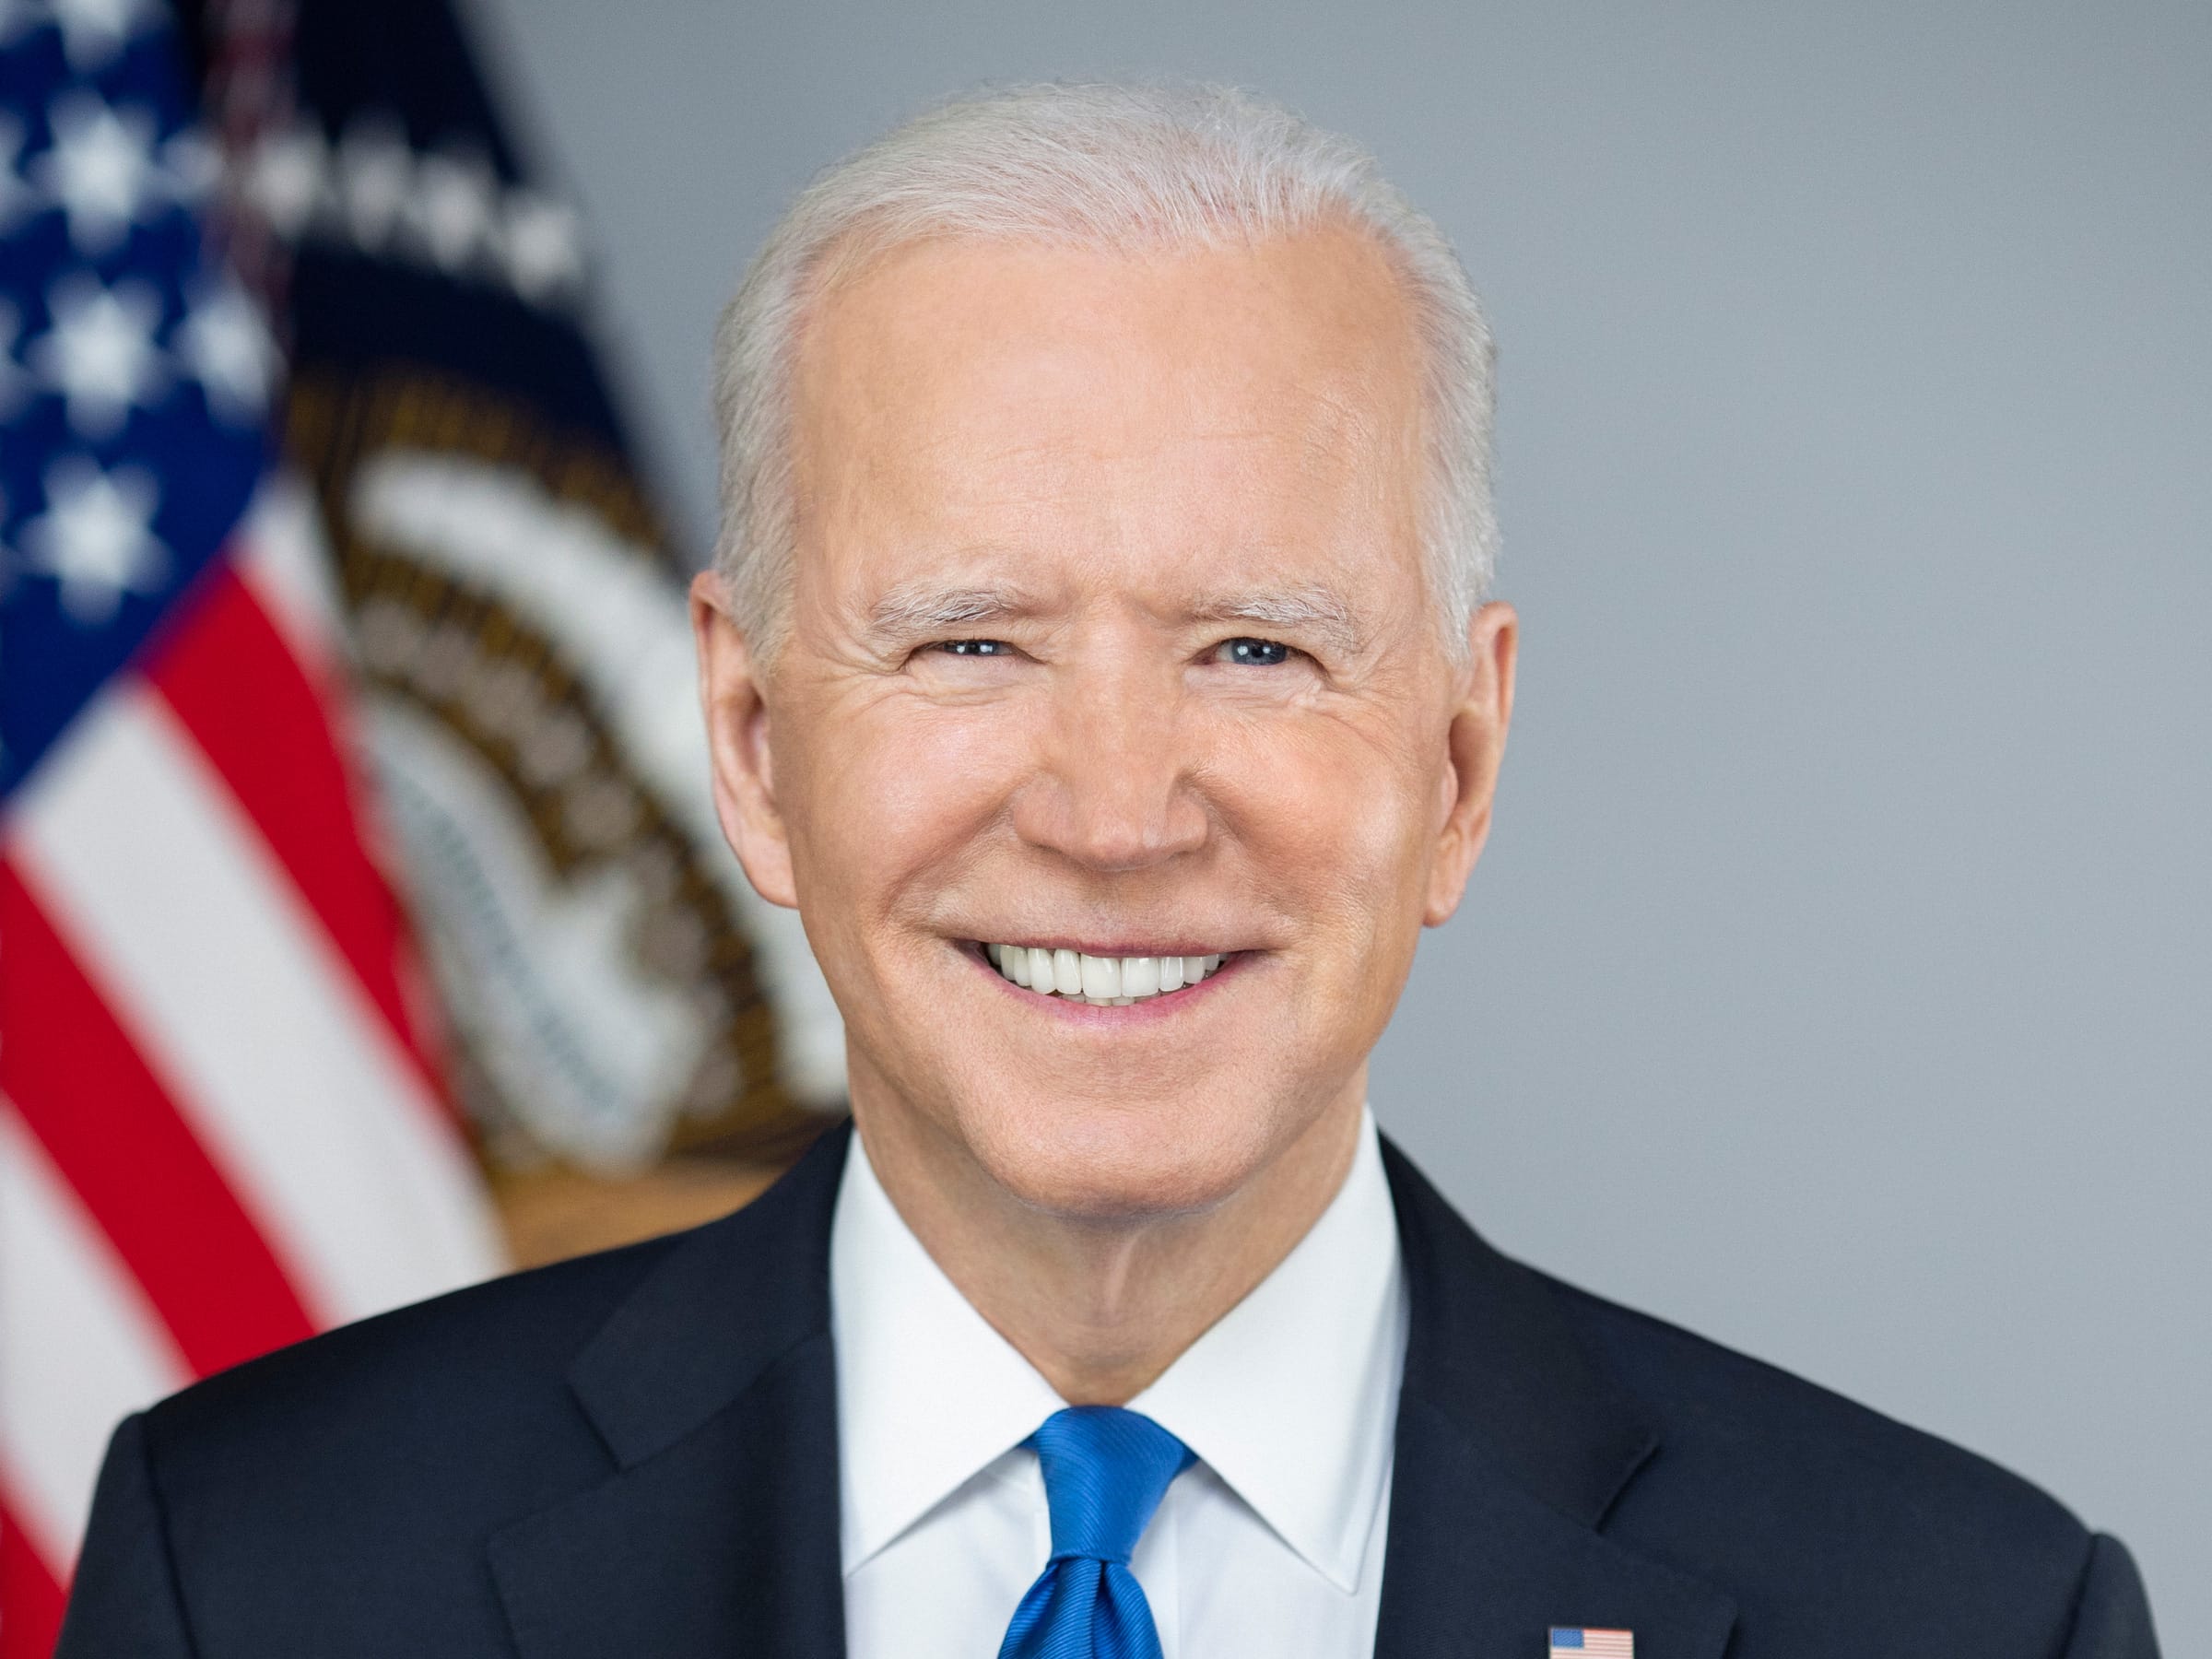 what to text to donate to joe biden - Biden|President|Joe|Years|Trump|Delaware|Vice|Time|Obama|Senate|States|Law|Age|Campaign|Election|Administration|Family|House|Senator|Office|School|Wife|People|Hunter|University|Act|State|Year|Life|Party|Committee|Children|Beau|Daughter|War|Jill|Day|Facts|Americans|Presidency|Joe Biden|United States|Vice President|White House|Law School|President Trump|Foreign Relations Committee|Donald Trump|President Biden|Presidential Campaign|Presidential Election|Democratic Party|Syracuse University|United Nations|Net Worth|Barack Obama|Judiciary Committee|Neilia Hunter|U.S. Senate|Hillary Clinton|New York Times|Obama Administration|Empty Store Shelves|Systemic Racism|Castle County Council|Archmere Academy|U.S. Senator|Vice Presidency|Second Term|Biden Administration